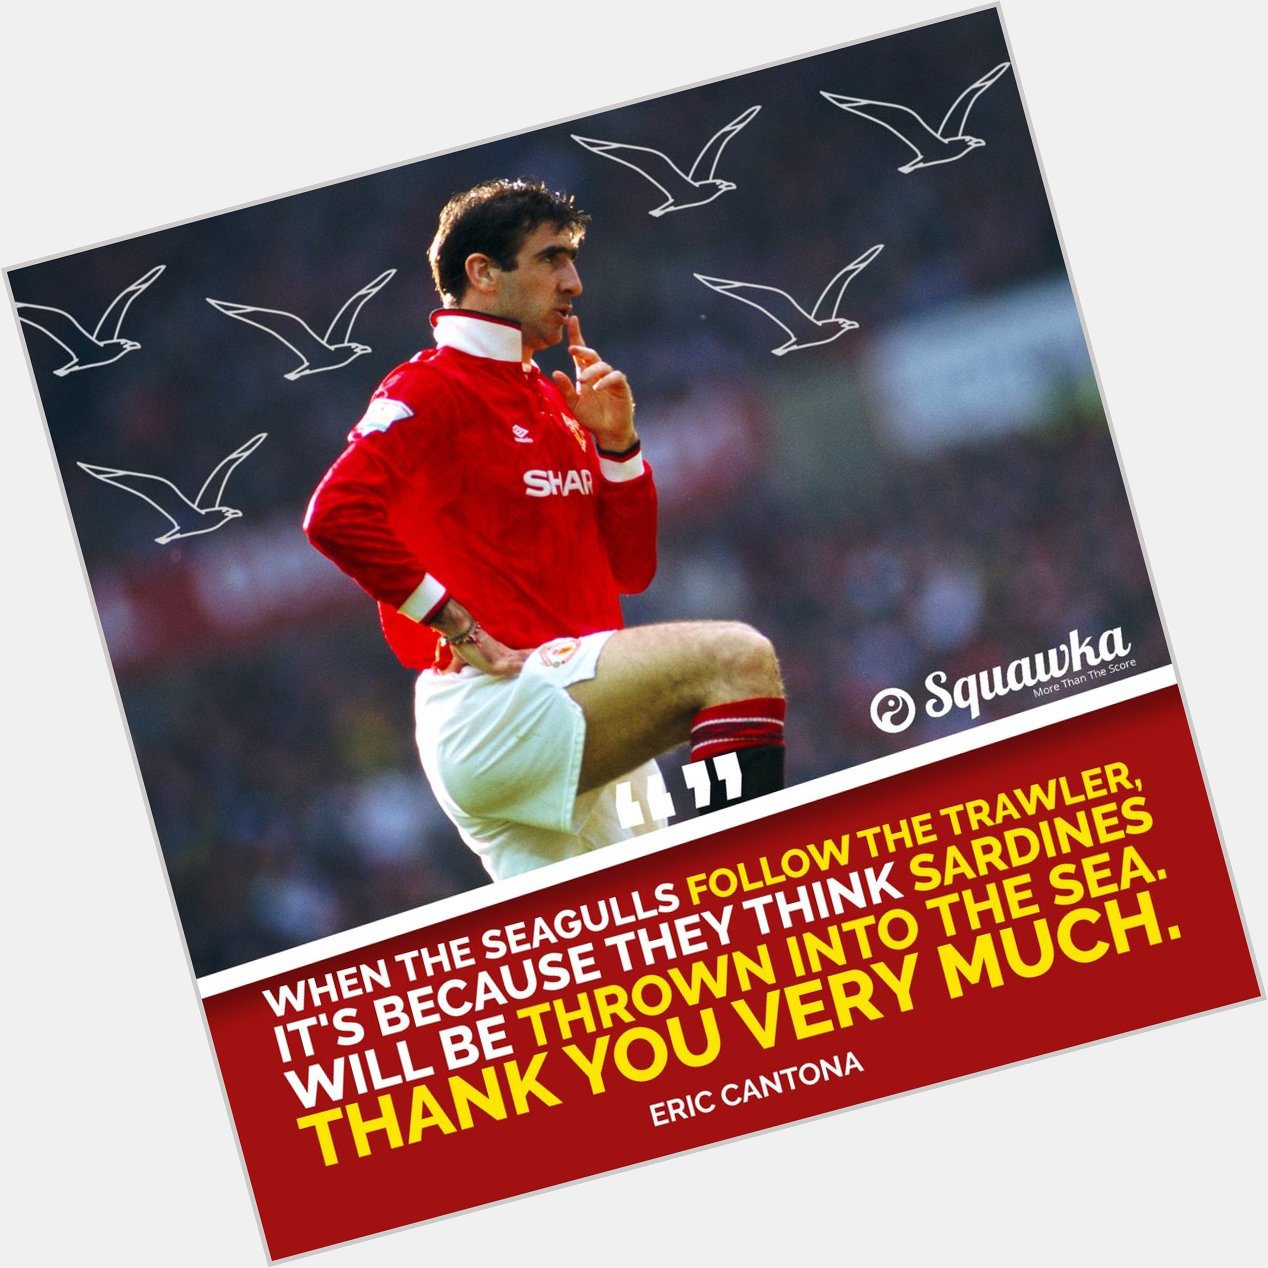 Happy 51st birthday, Eric Cantona!

Who could forget this incredible quote from the Manchester United legend... 